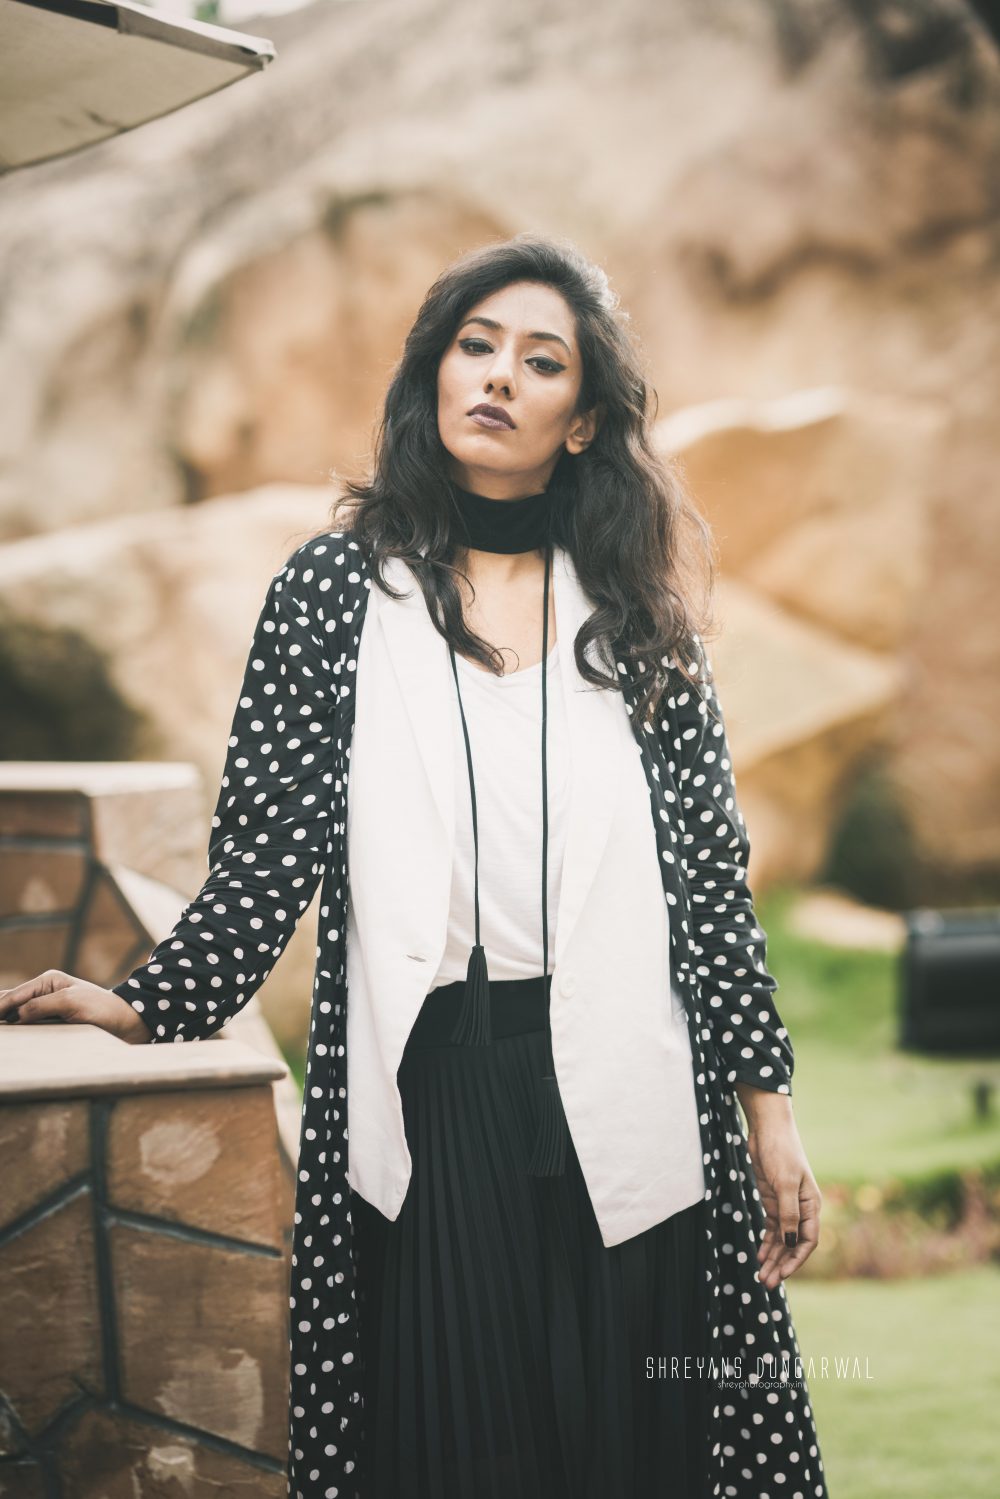  Feature Fashion Style Magazine You and I Hyderabad Blogger Polka Black White Choker Jacket Faballey Code Chemistry India Layering Goth Wine Lips Dark Photography Indian Girl Naznin Suhaer I Dress for the Applause Shoot Cover Girl Interview Lookbook Streetstyle Zaful Fashion 